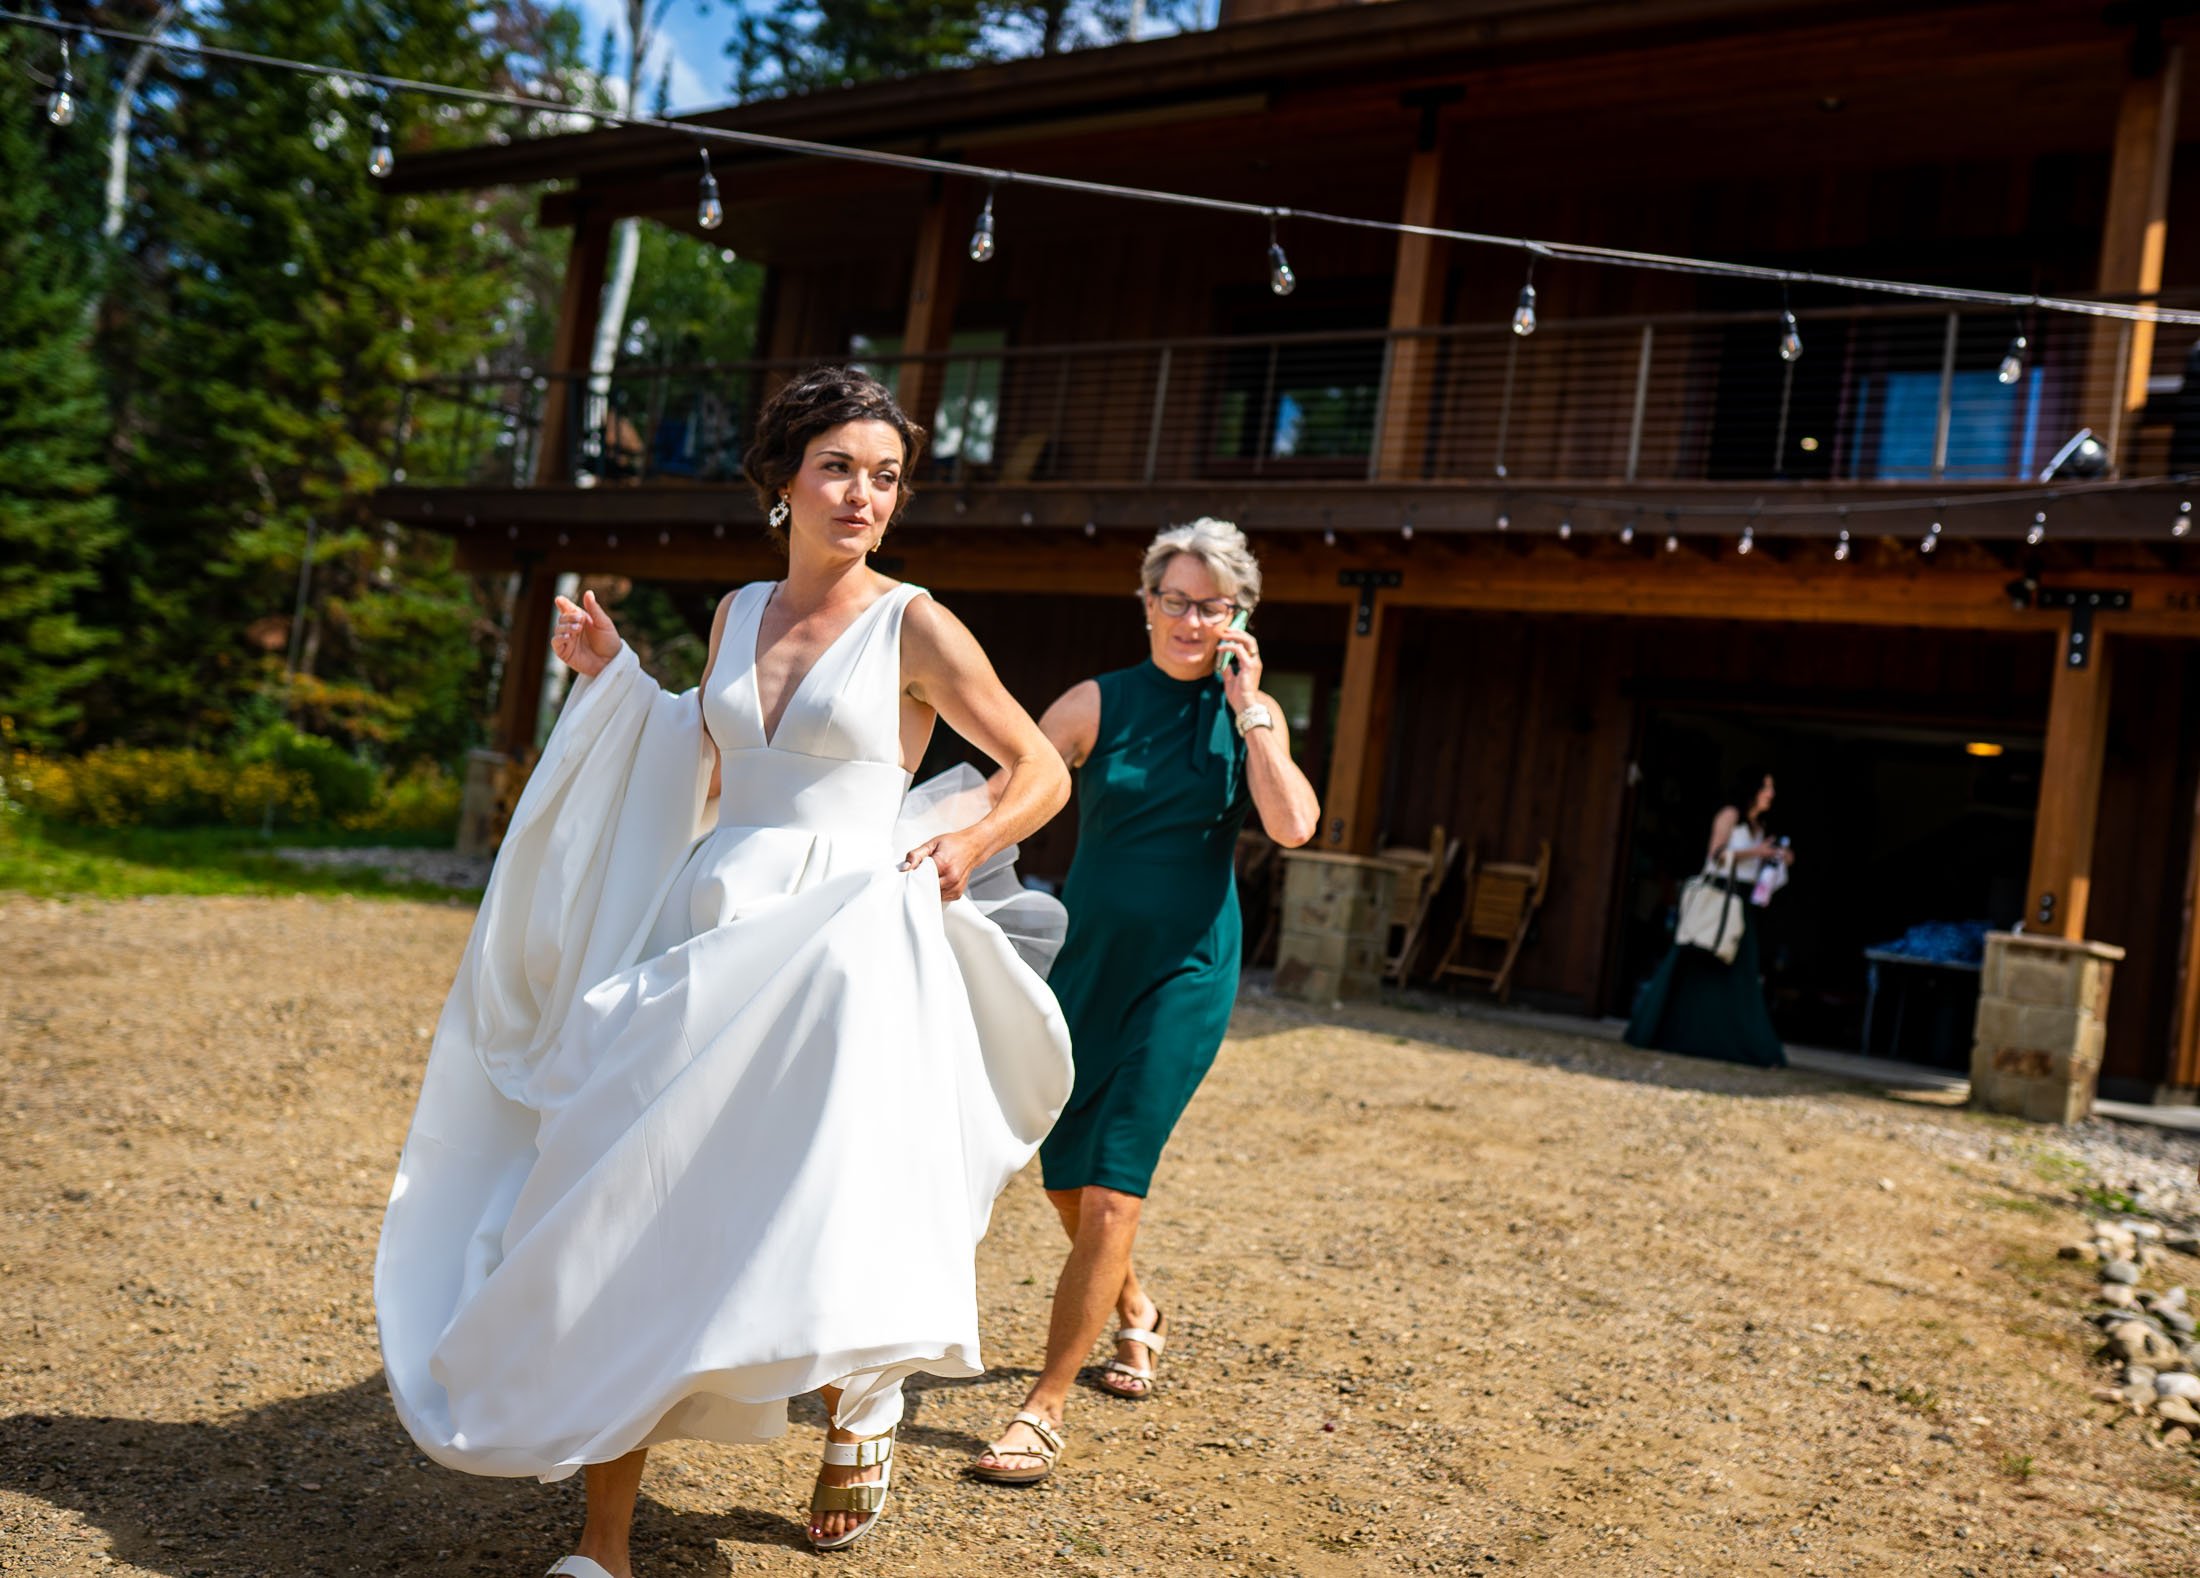 Bride walks to the shuttle with the help of her mother at her family's home in the mountains, wedding, wedding photos, wedding photography, wedding photographer, wedding inspiration, wedding photo inspiration, wedding portraits, wedding ceremony, wedding reception, mountain wedding, Catholic Church wedding, Catholic Church wedding photos, Catholic Church wedding photography, Catholic Church wedding photographer, Catholic Church wedding inspiration, Catholic Church wedding venue, Steamboat Springs wedding, Steamboat Springs wedding photos, Steamboat Springs wedding photography, Steamboat Springs wedding photographer, Colorado wedding, Colorado wedding photos, Colorado wedding photography, Colorado wedding photographer, Colorado mountain wedding, Colorado wedding inspiration